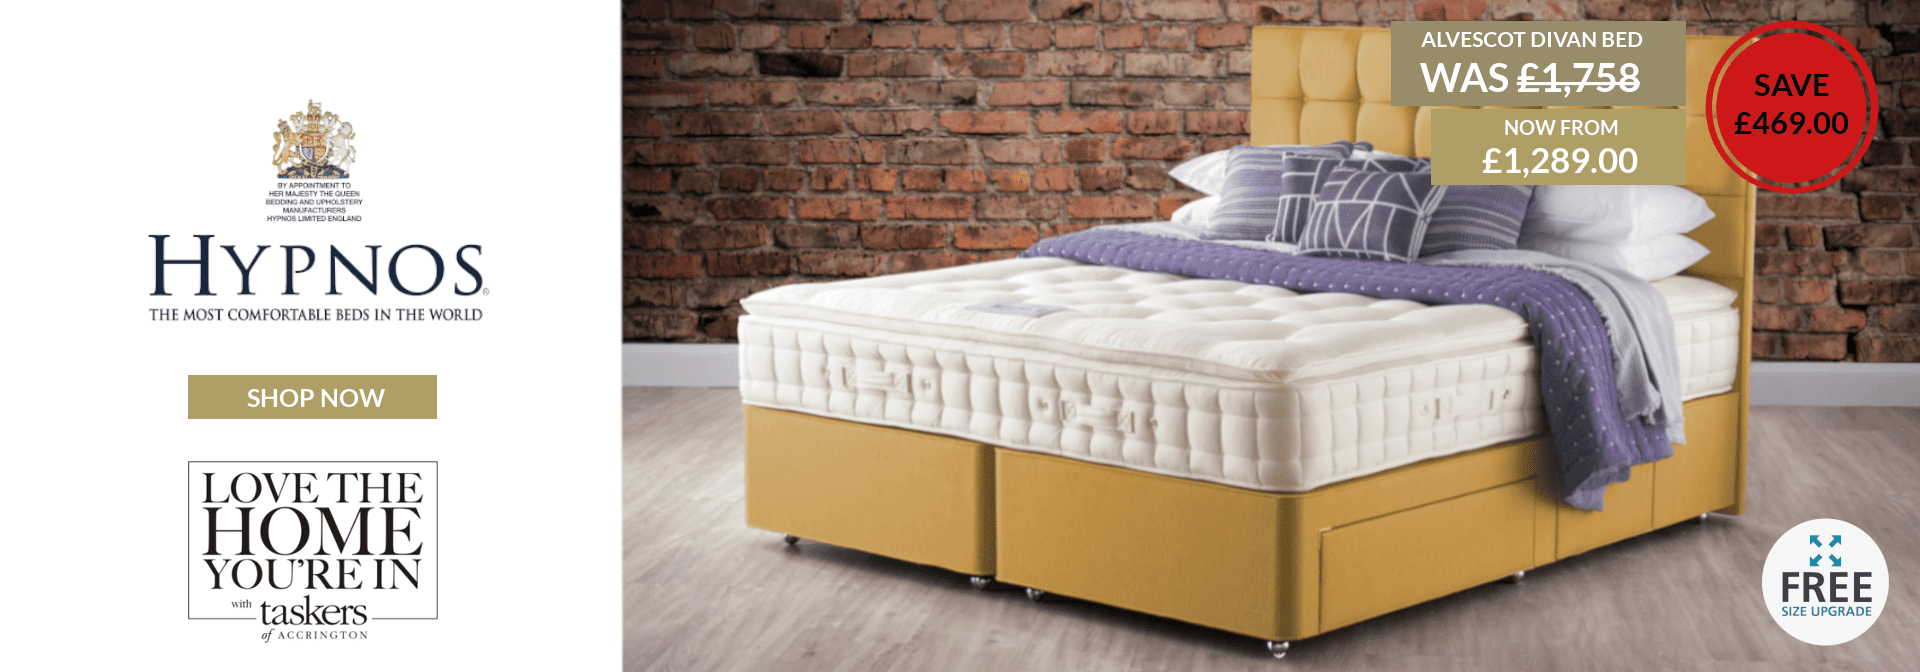 Hypnos Beds Free Size Upgrades Shop Now